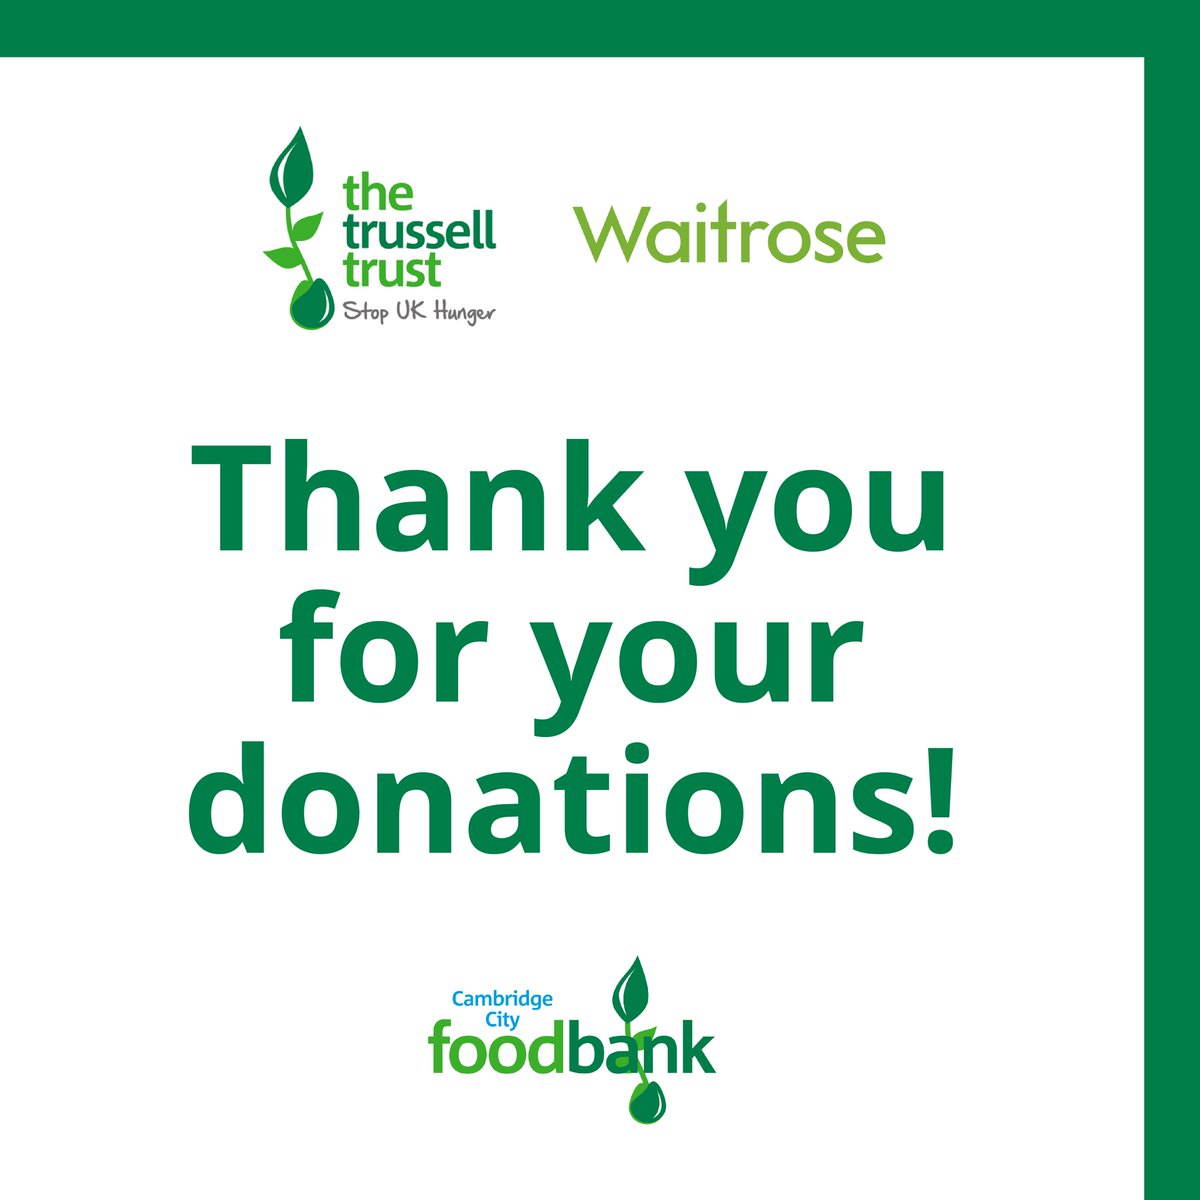 Every year starts with a downturn in donations. By organising collections, we’re able to bolster our supplies. Last month, we held a collection at @Waitrose, where we received a huge amount of donations. Thank you for your #donations.💚 To donate: cambridgecity.foodbank.org.uk/give-help/